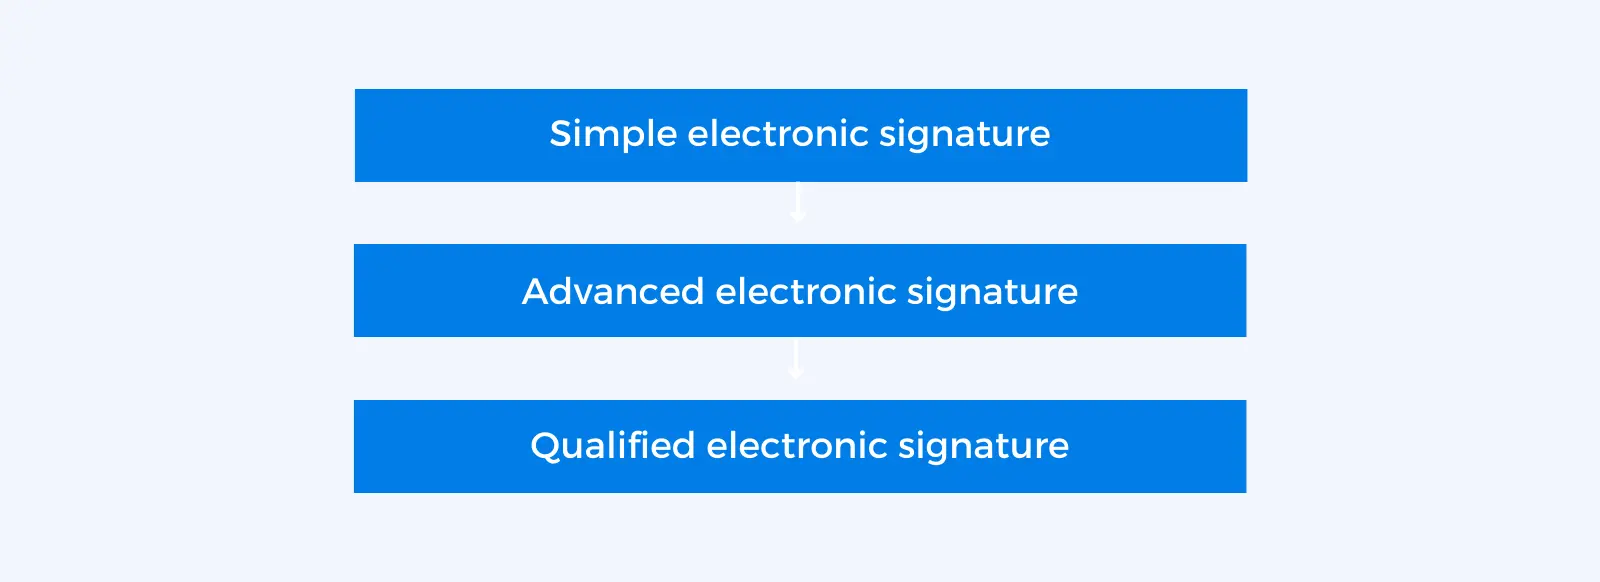 e-signatures by the level of security